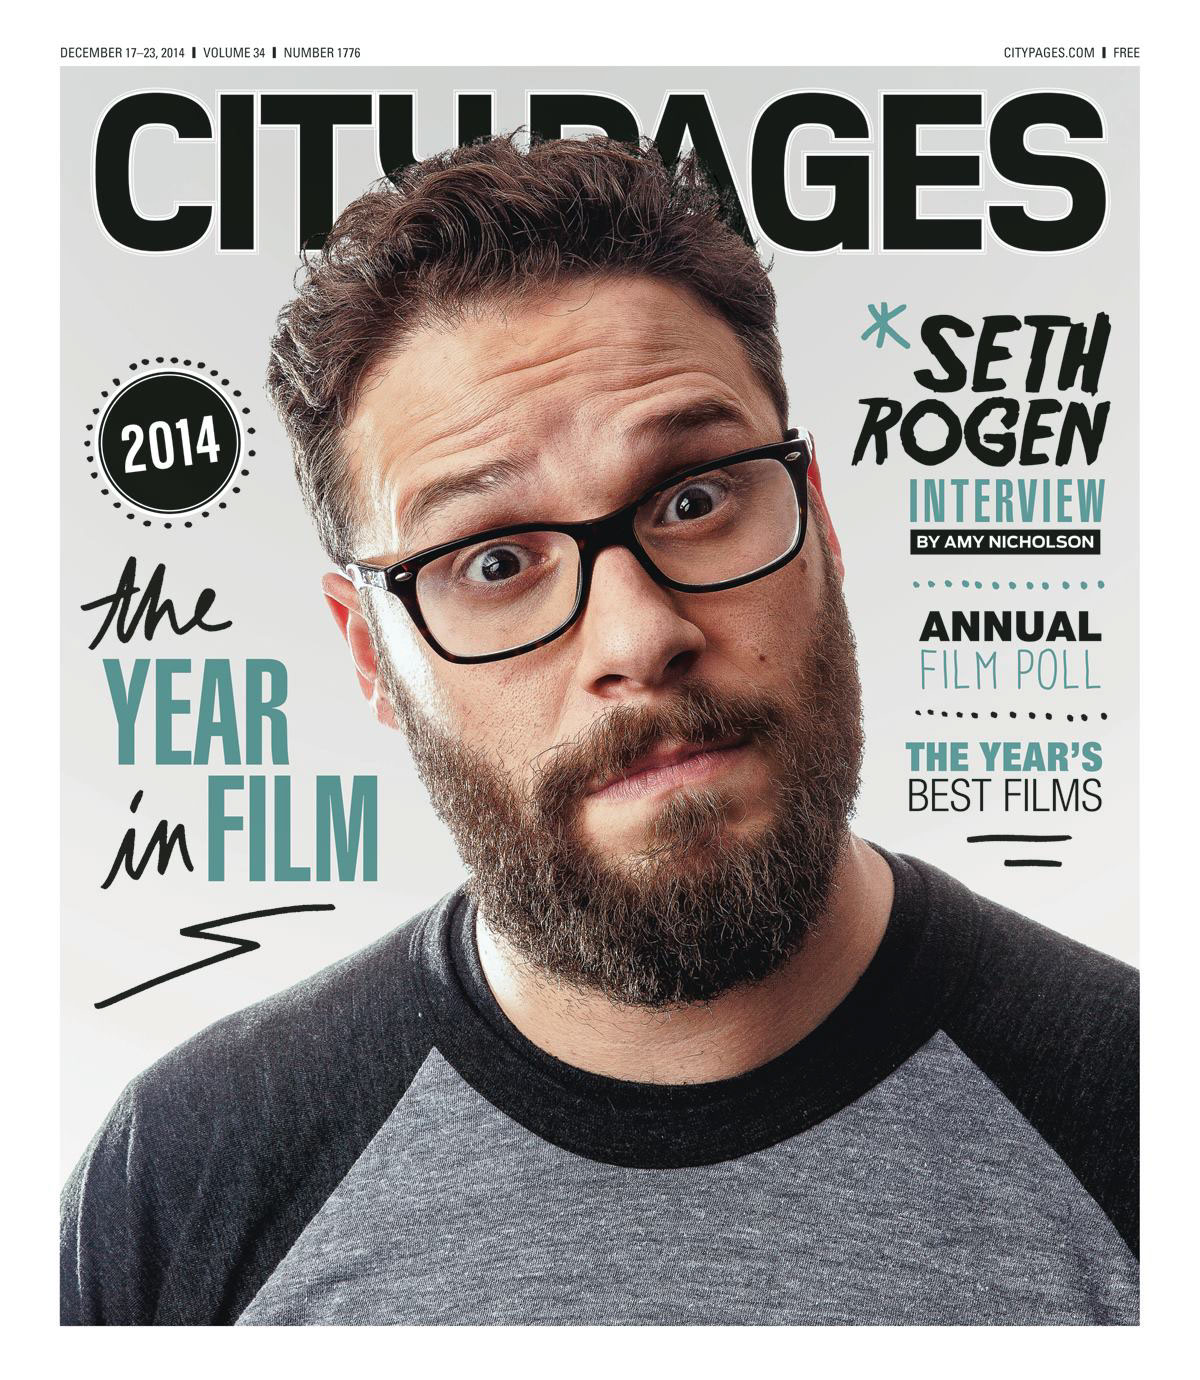 Seth Rogen LAWEEKLY phoenixnewtimes miaminewtimes CityPages riverfonttimes TheInterview editorial villagevoice covers Sony sonypictures sonypicturesstudios